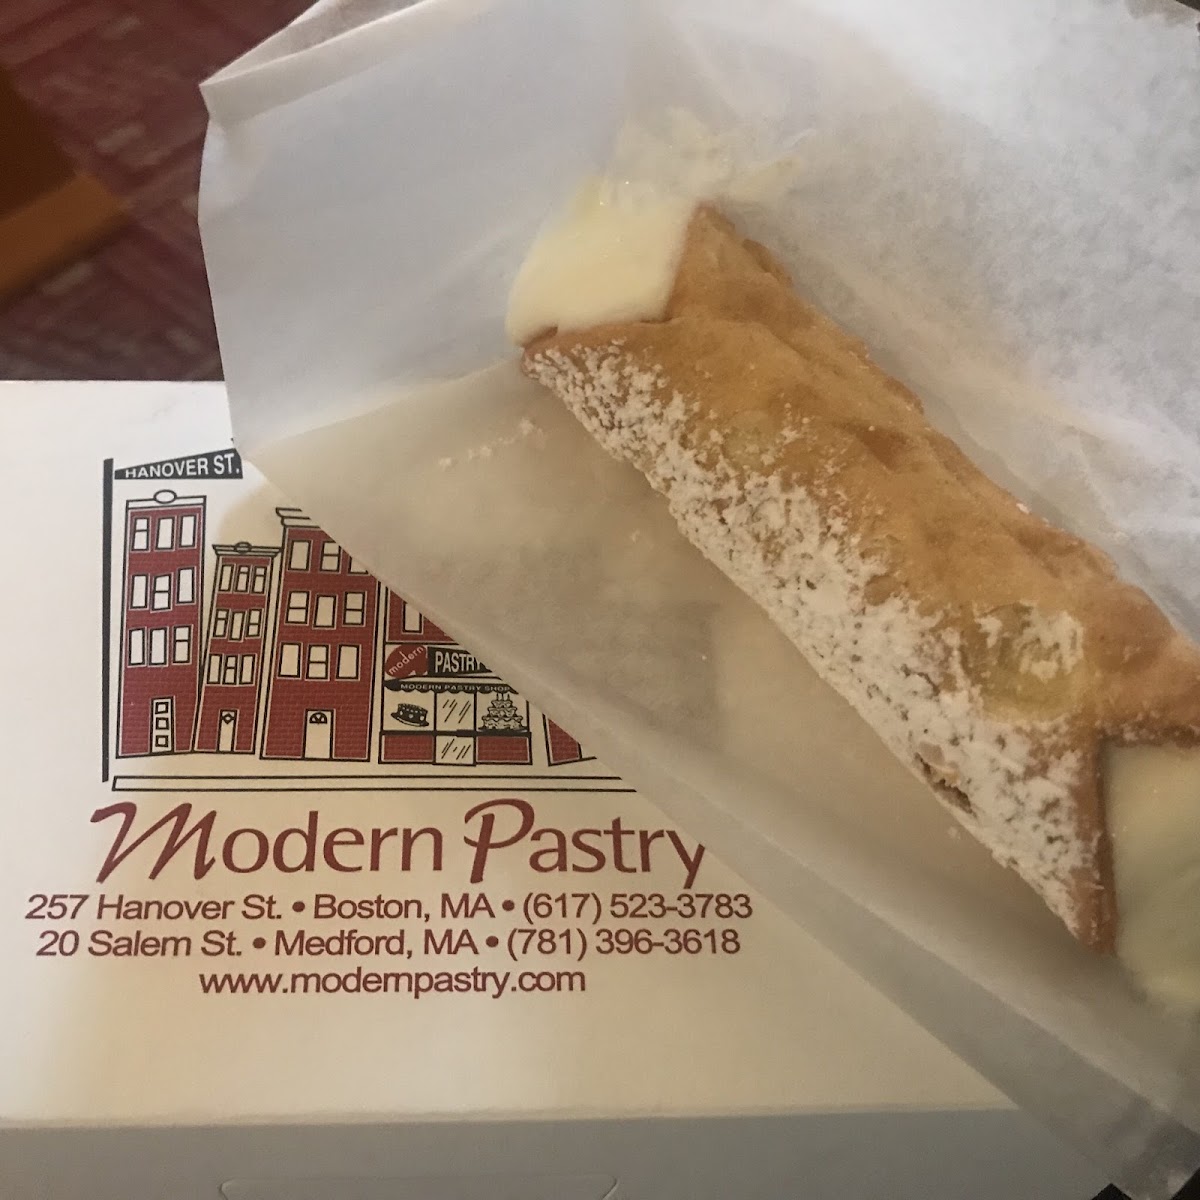 Gluten-Free Pastries at Modern Pastry